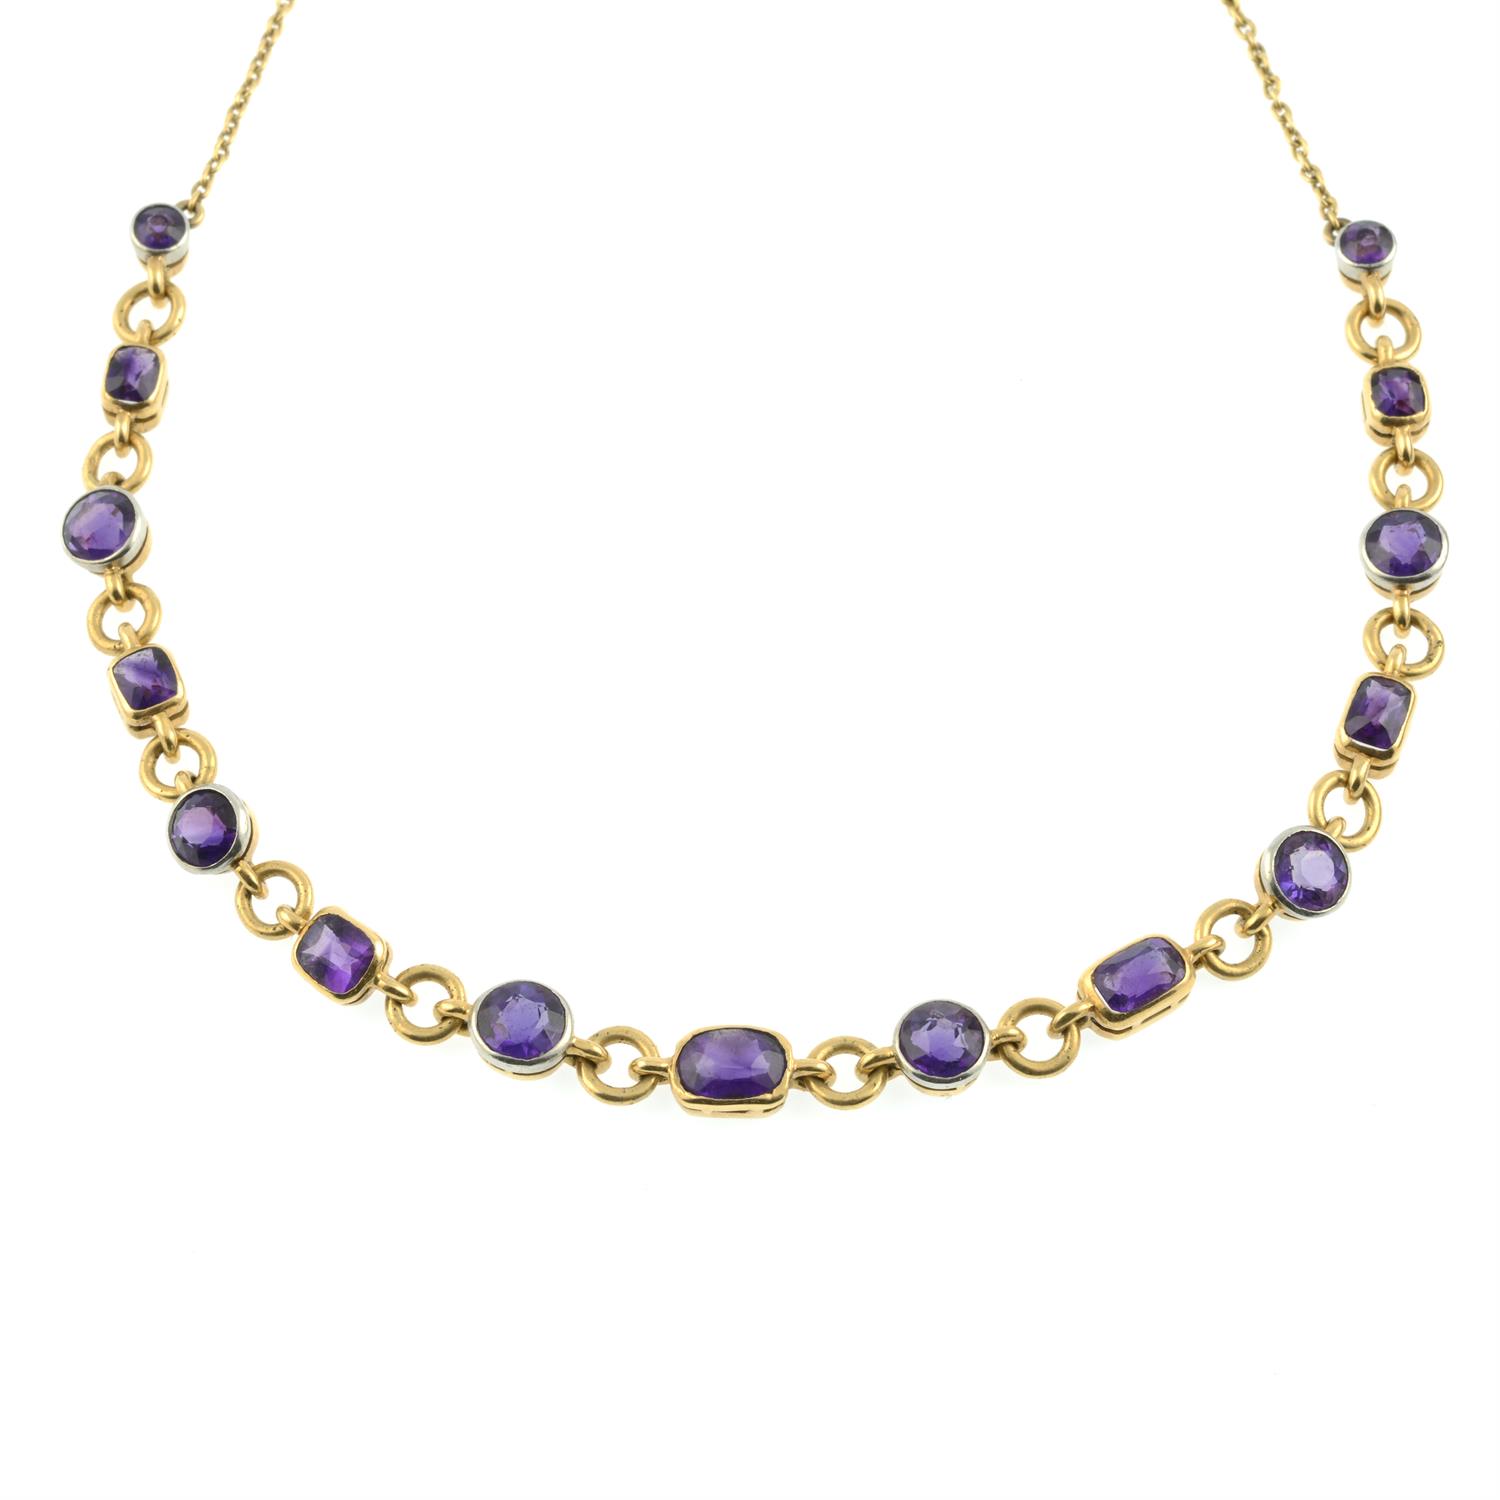 An early 20th century platinum and 18ct gold amethyst necklace. - Image 2 of 3